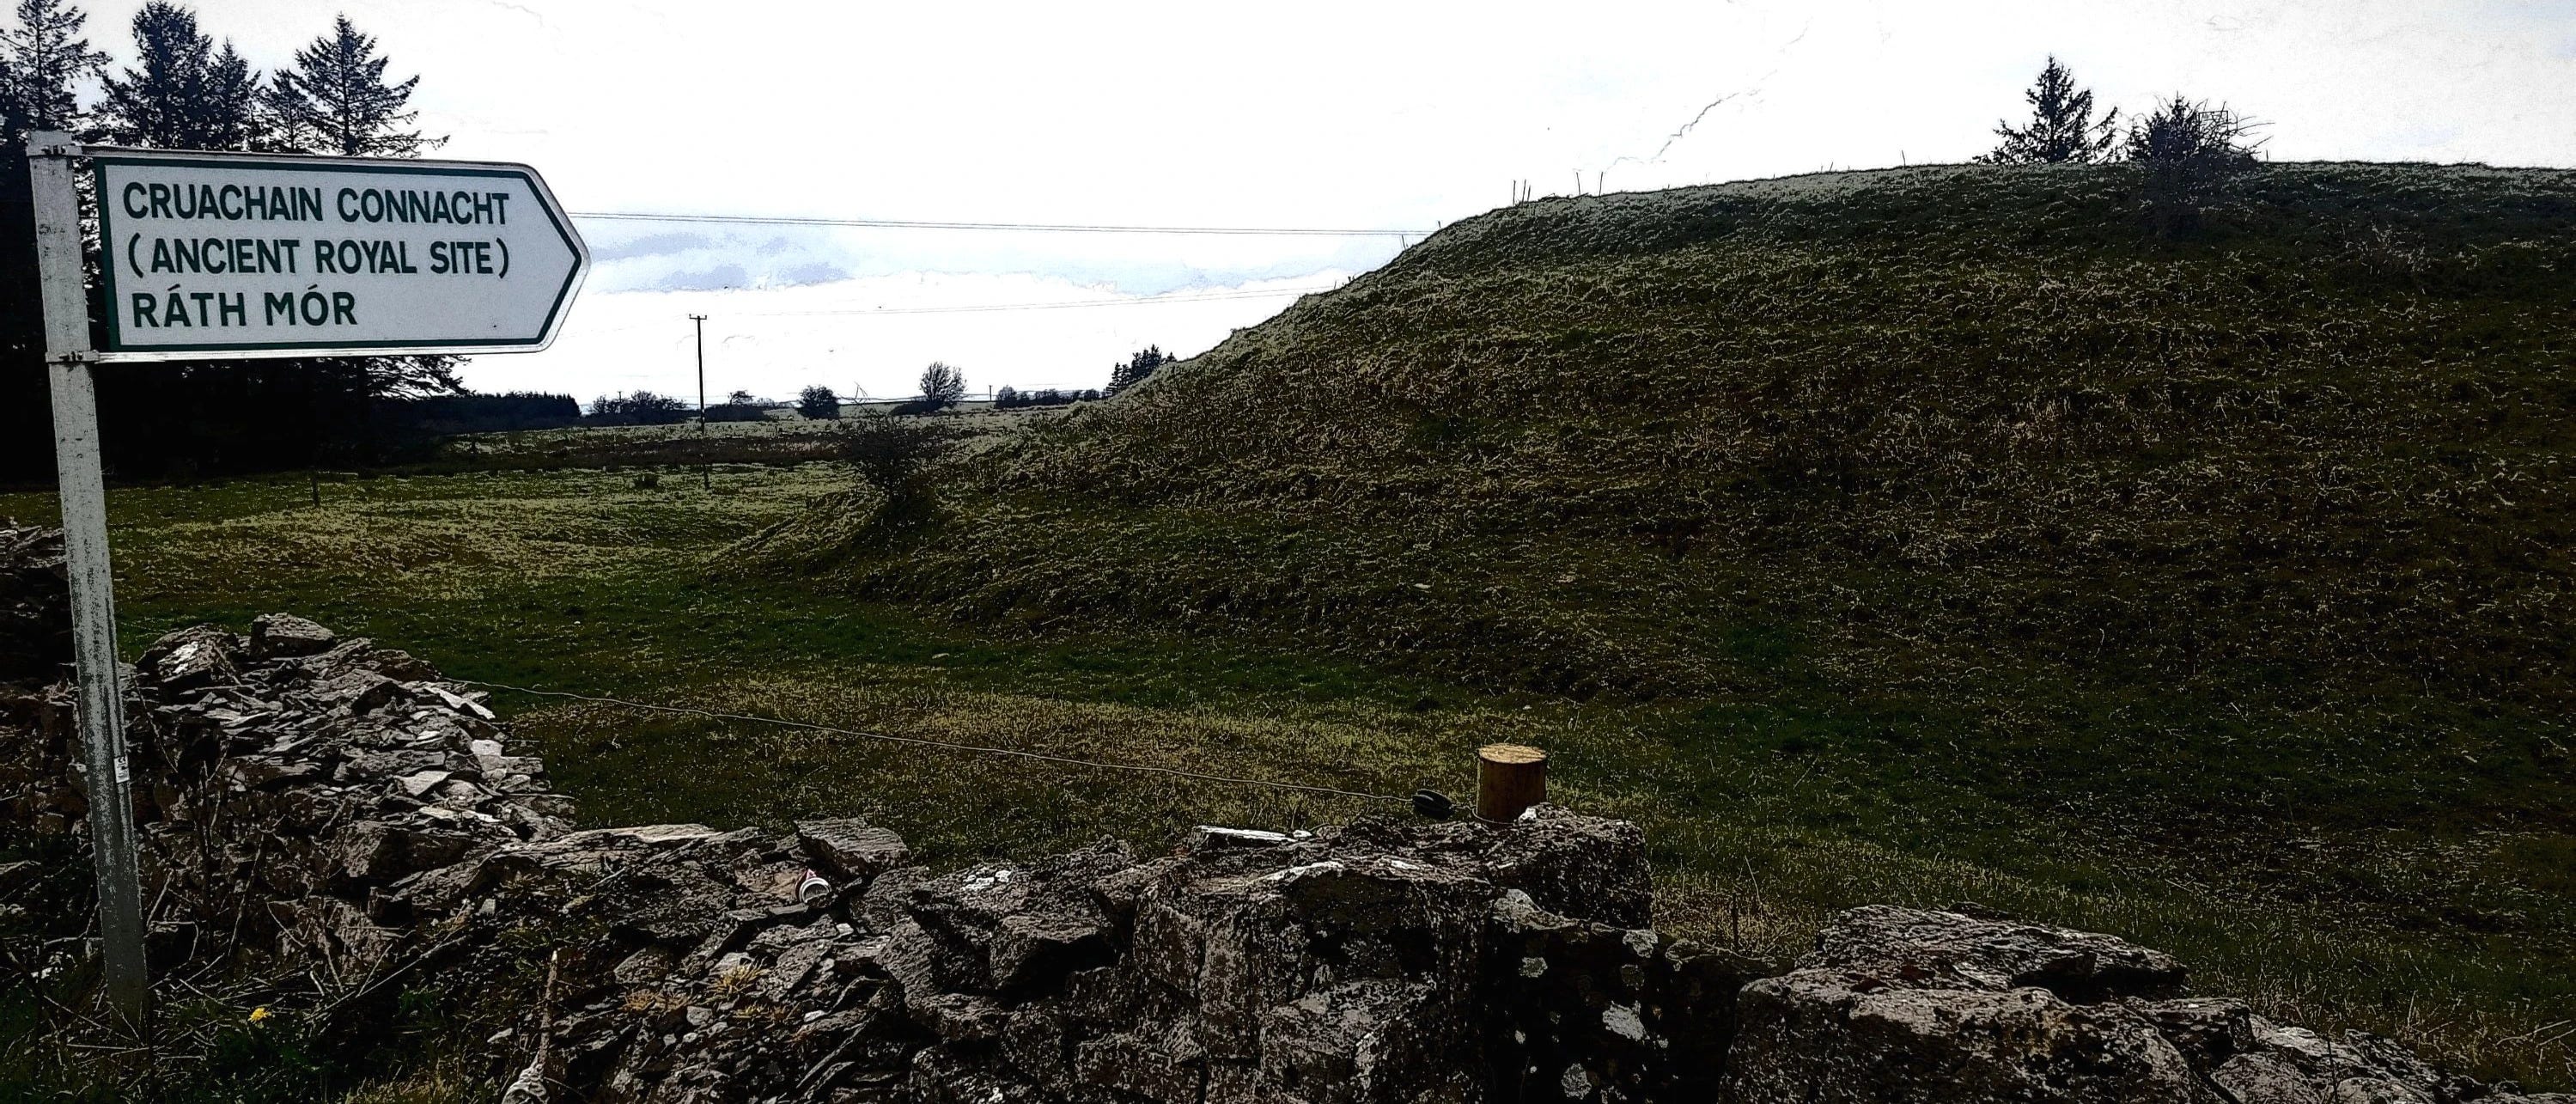 The mound of Rath Mór on the other side of a stone wall with a white road sign stating "Cruachaain Connacht (ancient royal site) Rath Mór"